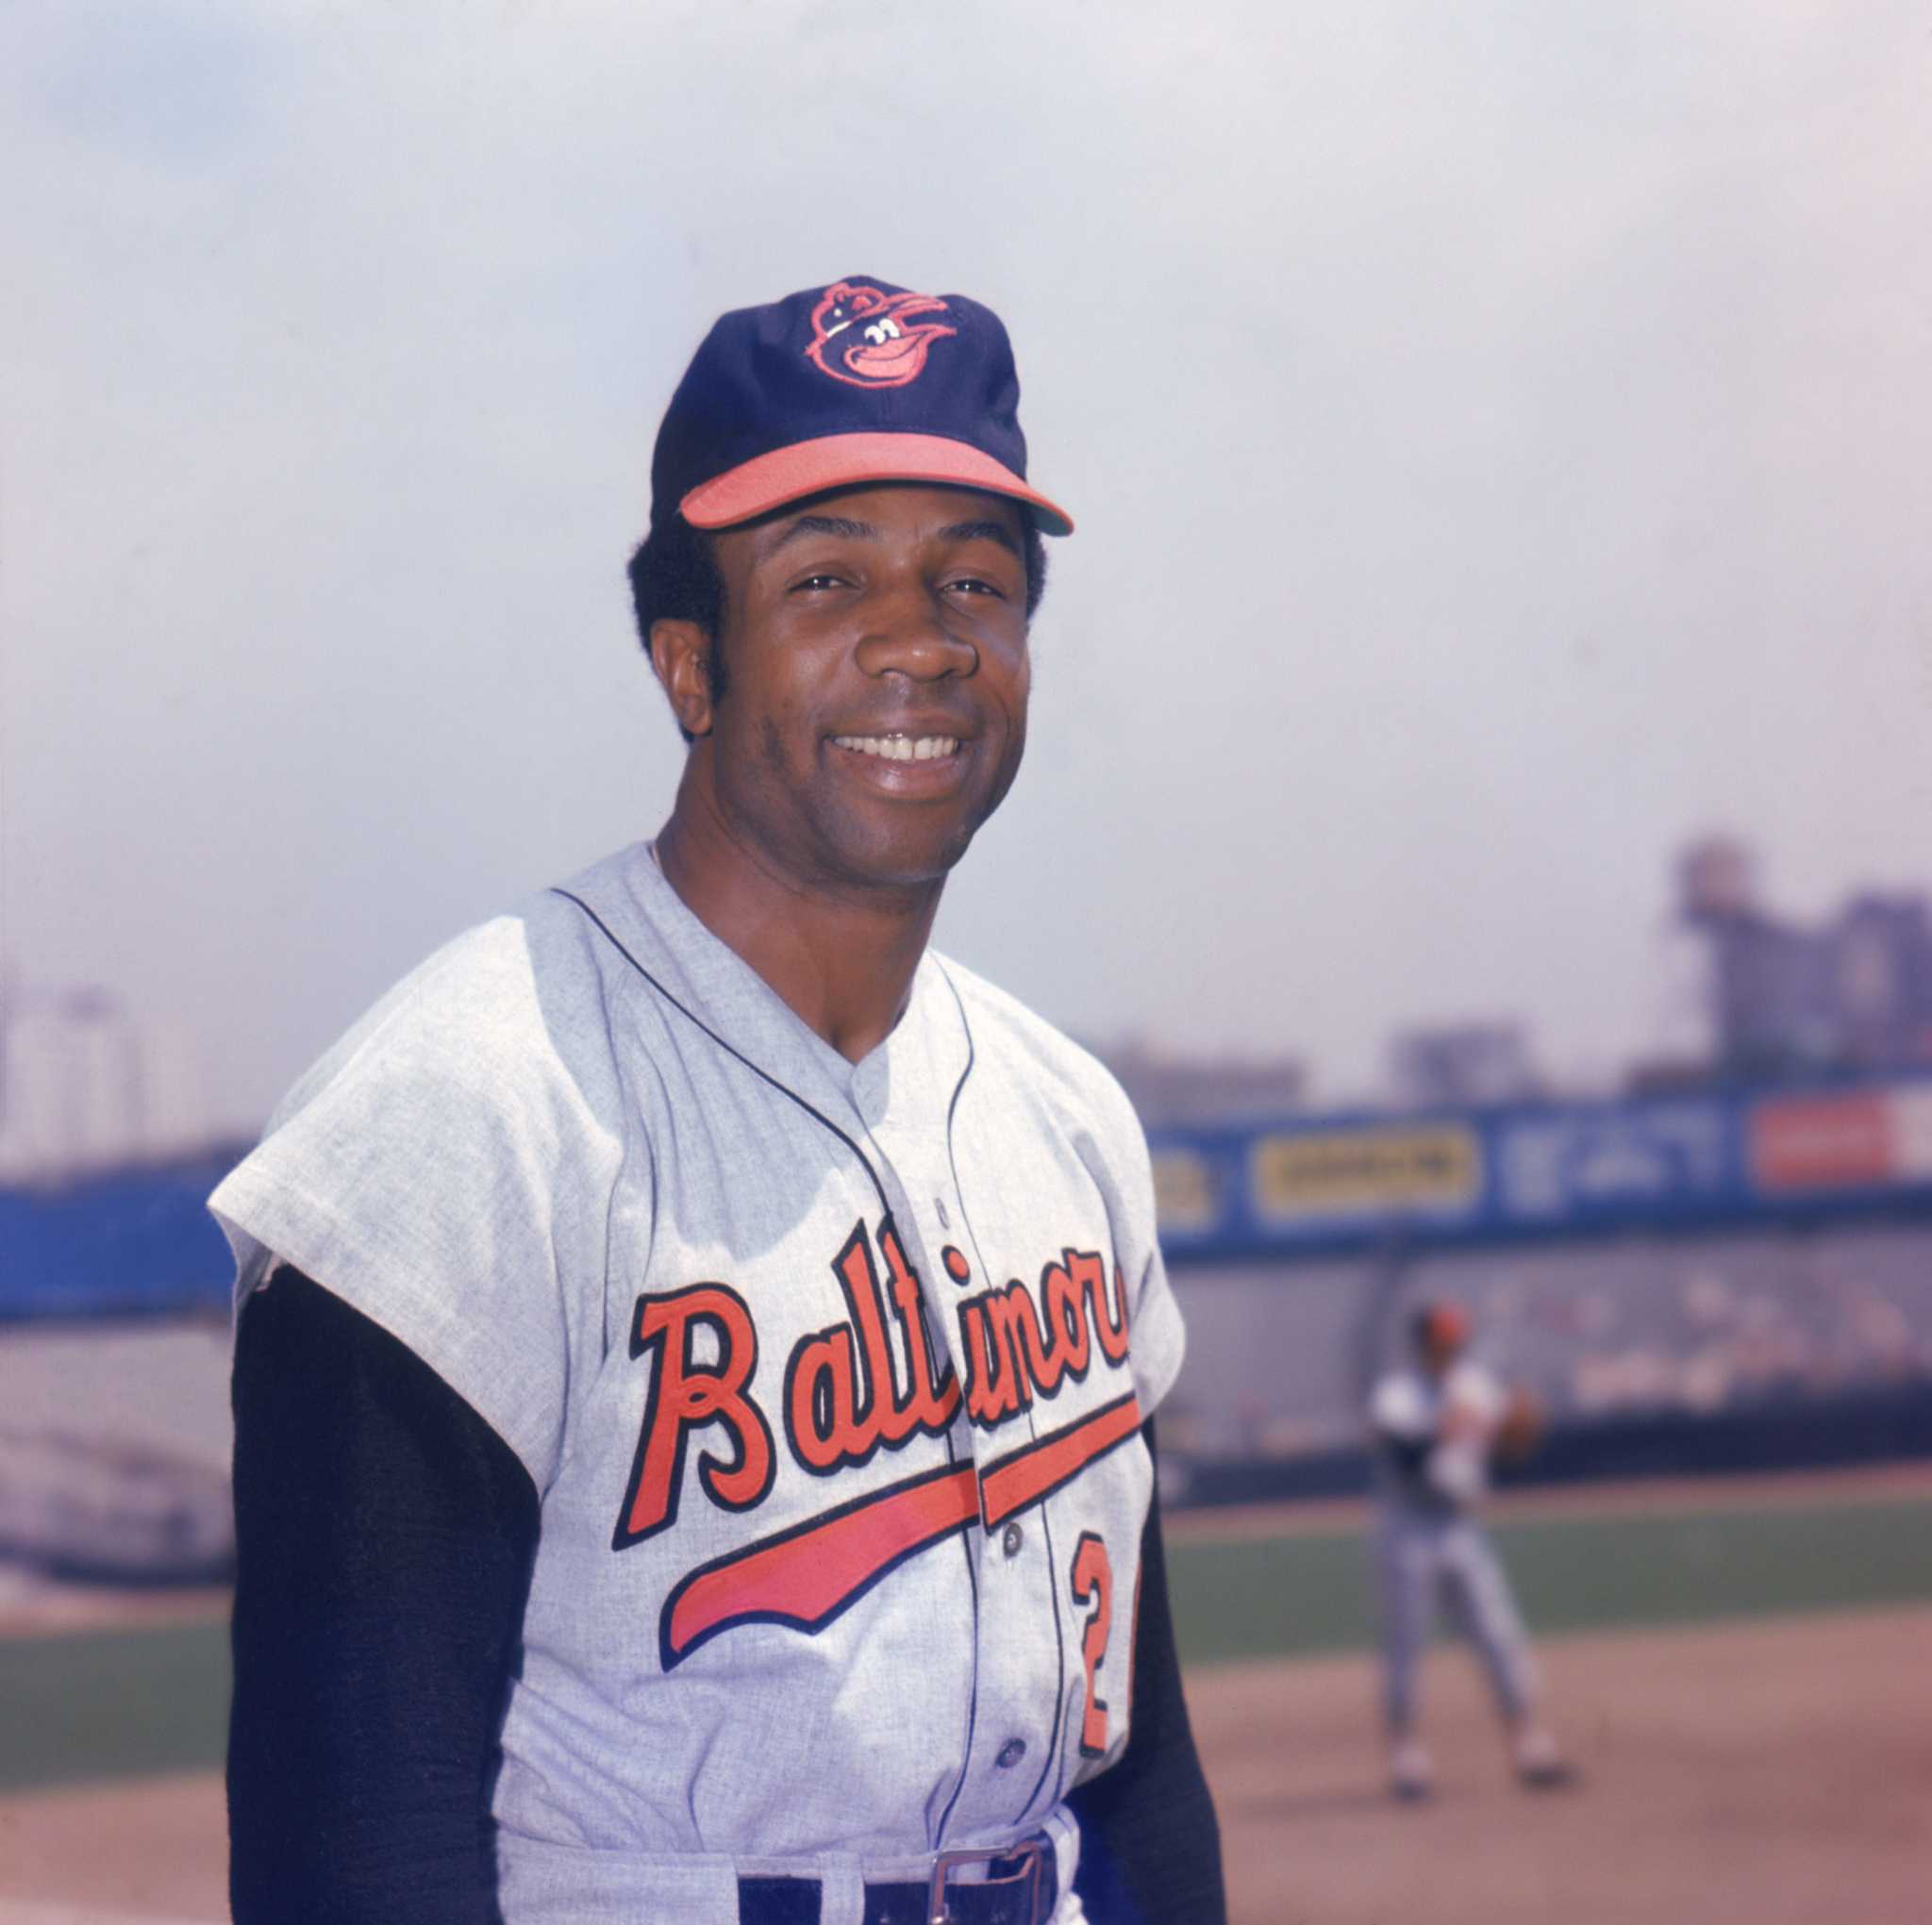 Frank Robinson, baseball's first black manager and Hall of Famer, dies at 83